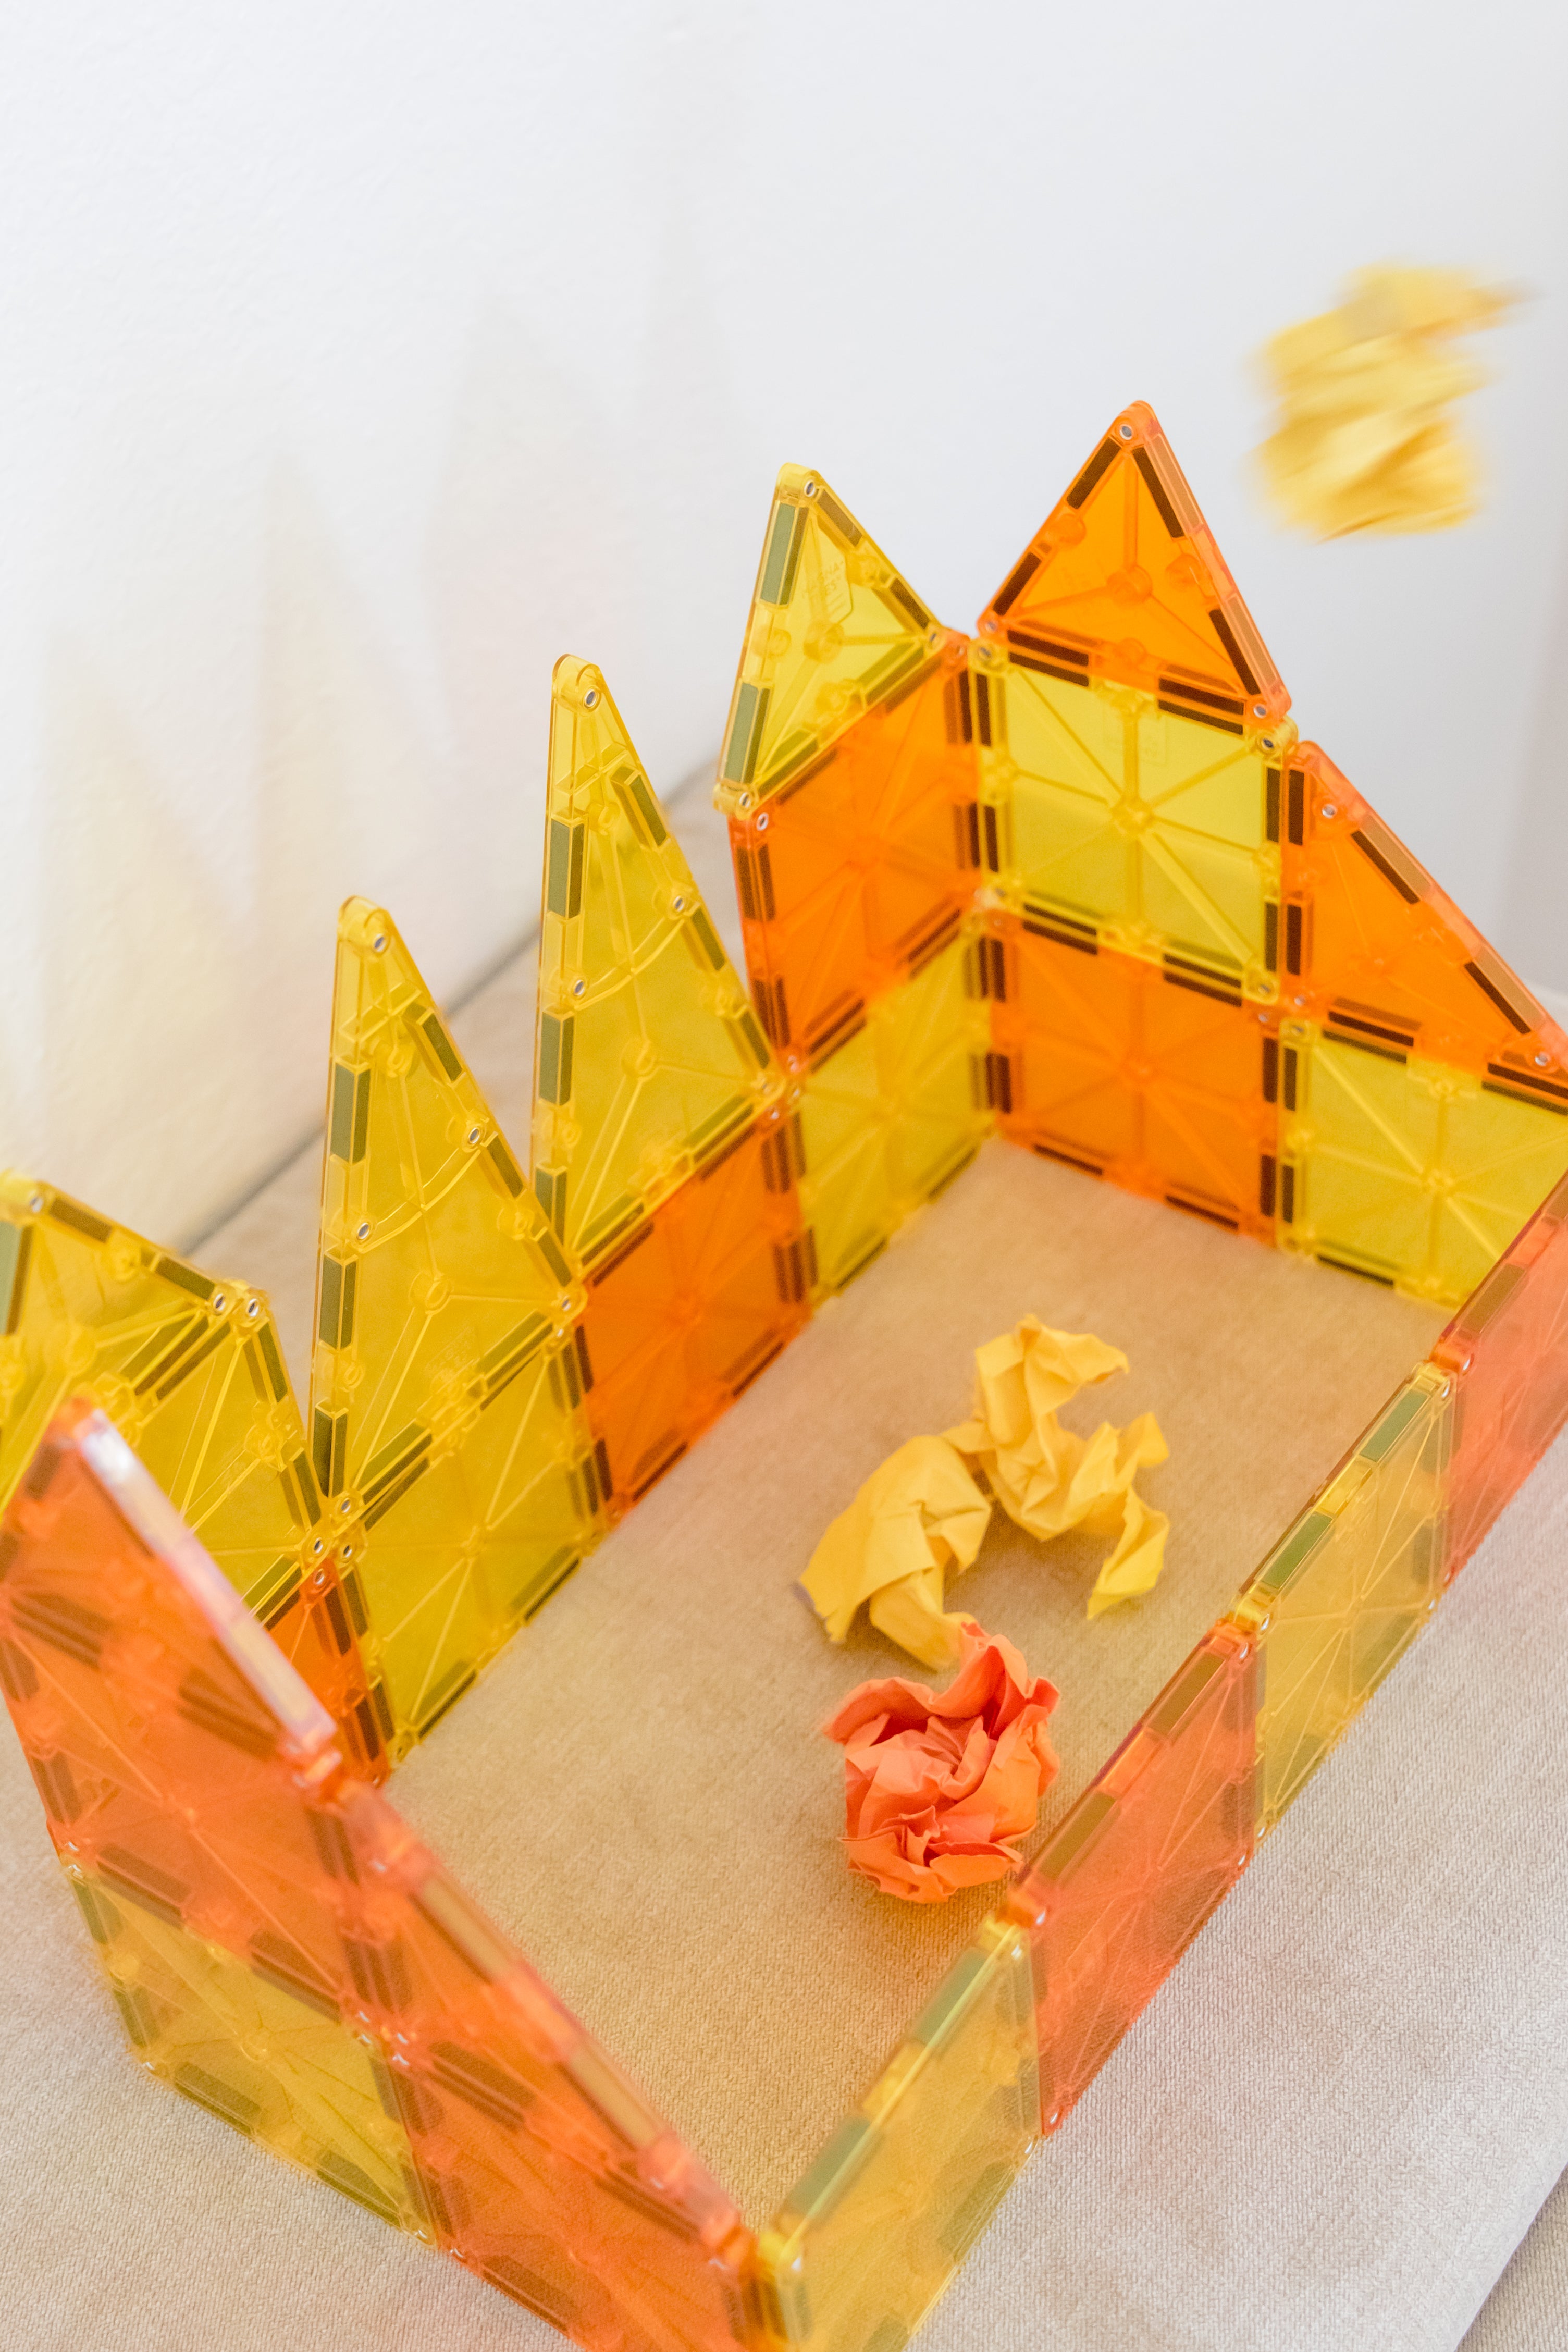 Yellow and orange Magna-tile structure with a piece of orange and yellow paper with a yellow piece being tossed in